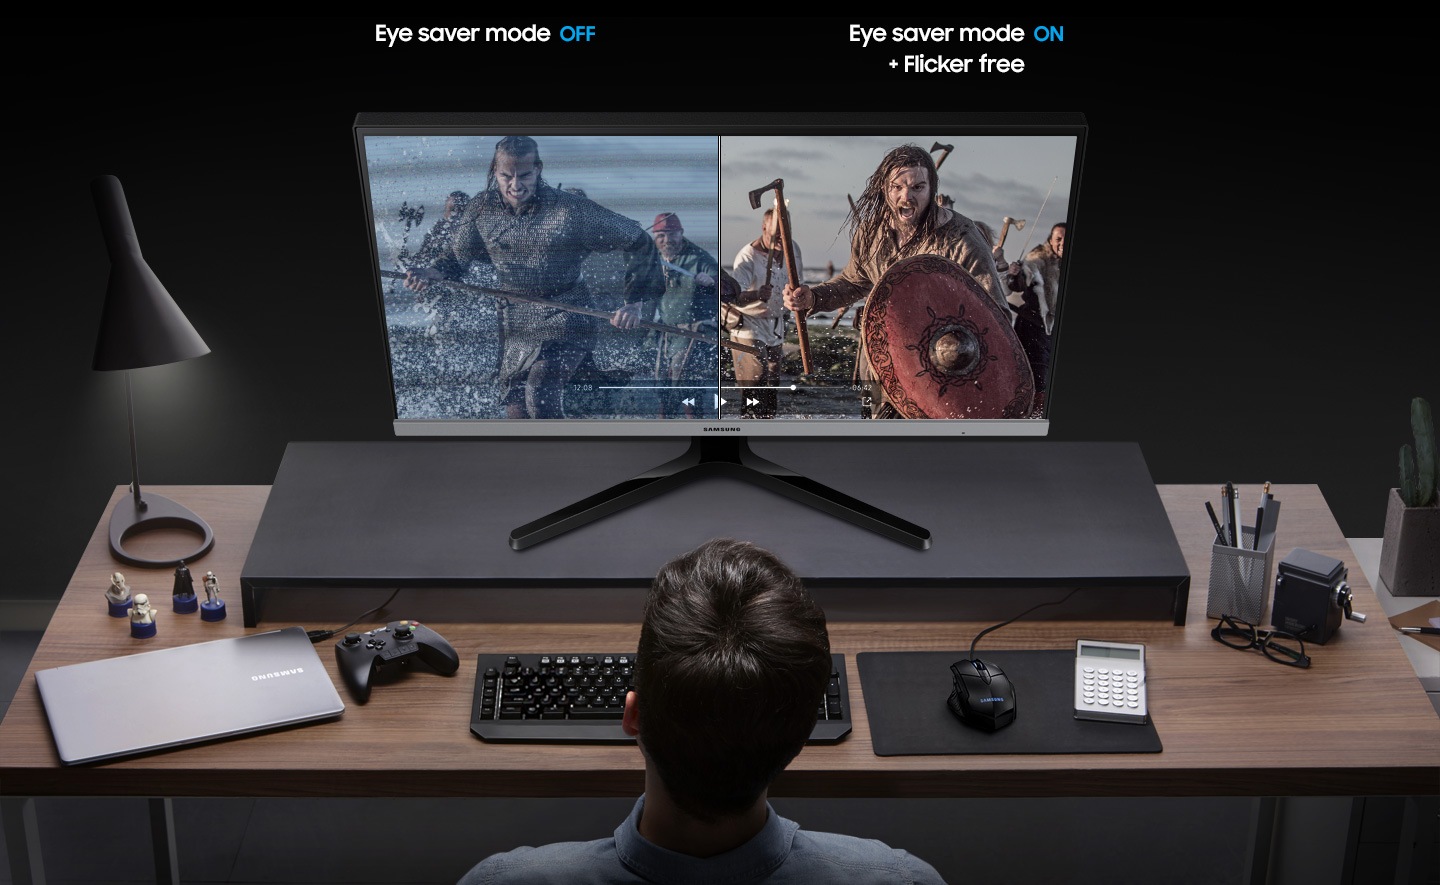 Eye saver mode off and Eye saver mode On + Flicker free comparison. In Eye saver mode off, the blue color is strong and horizontal stripes are visible on the screen, but in Eye saver mode on, a clean and warm color screen is displayed.